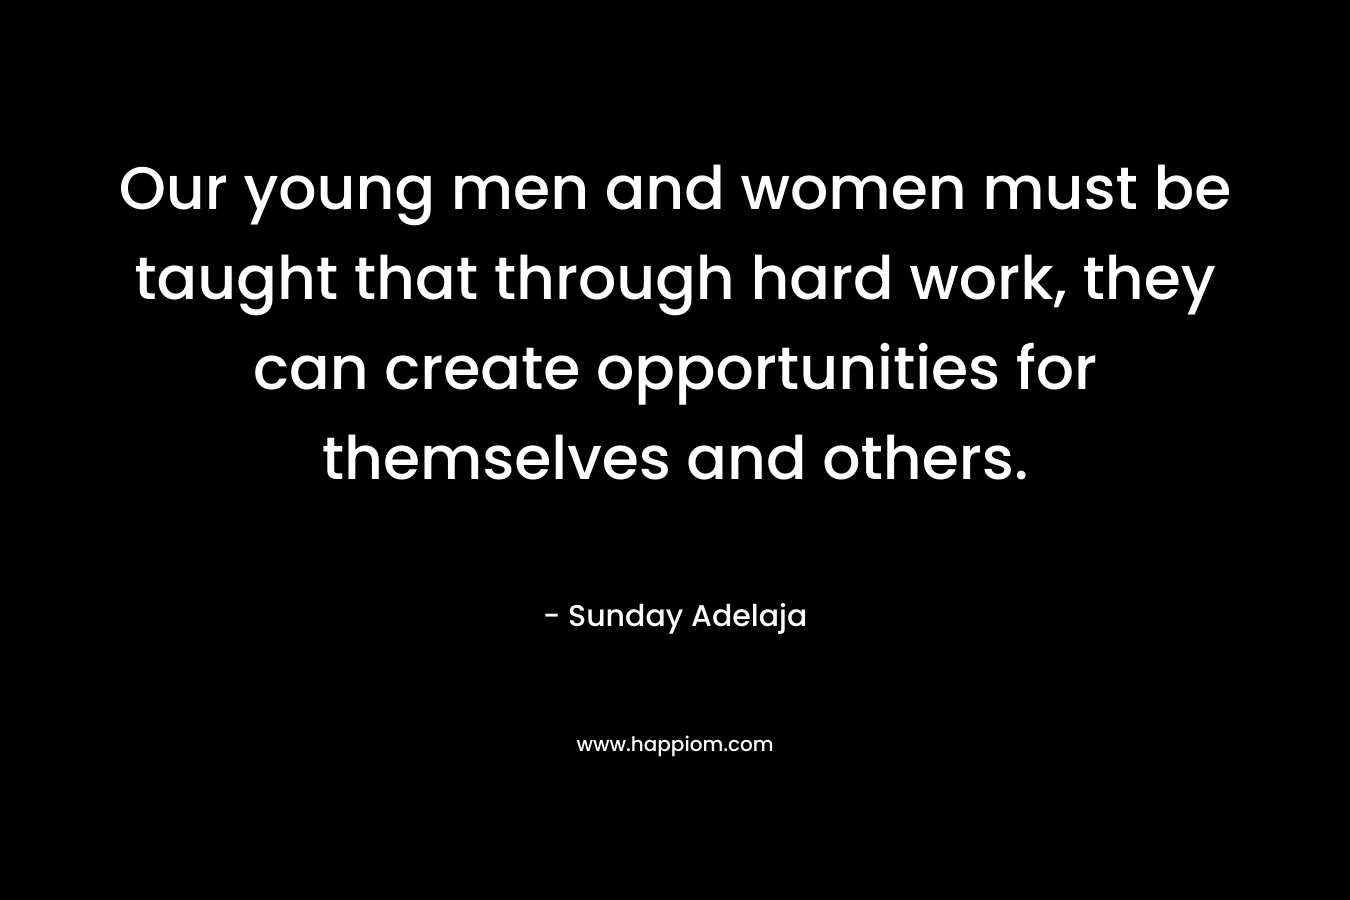 Our young men and women must be taught that through hard work, they can create opportunities for themselves and others. – Sunday Adelaja